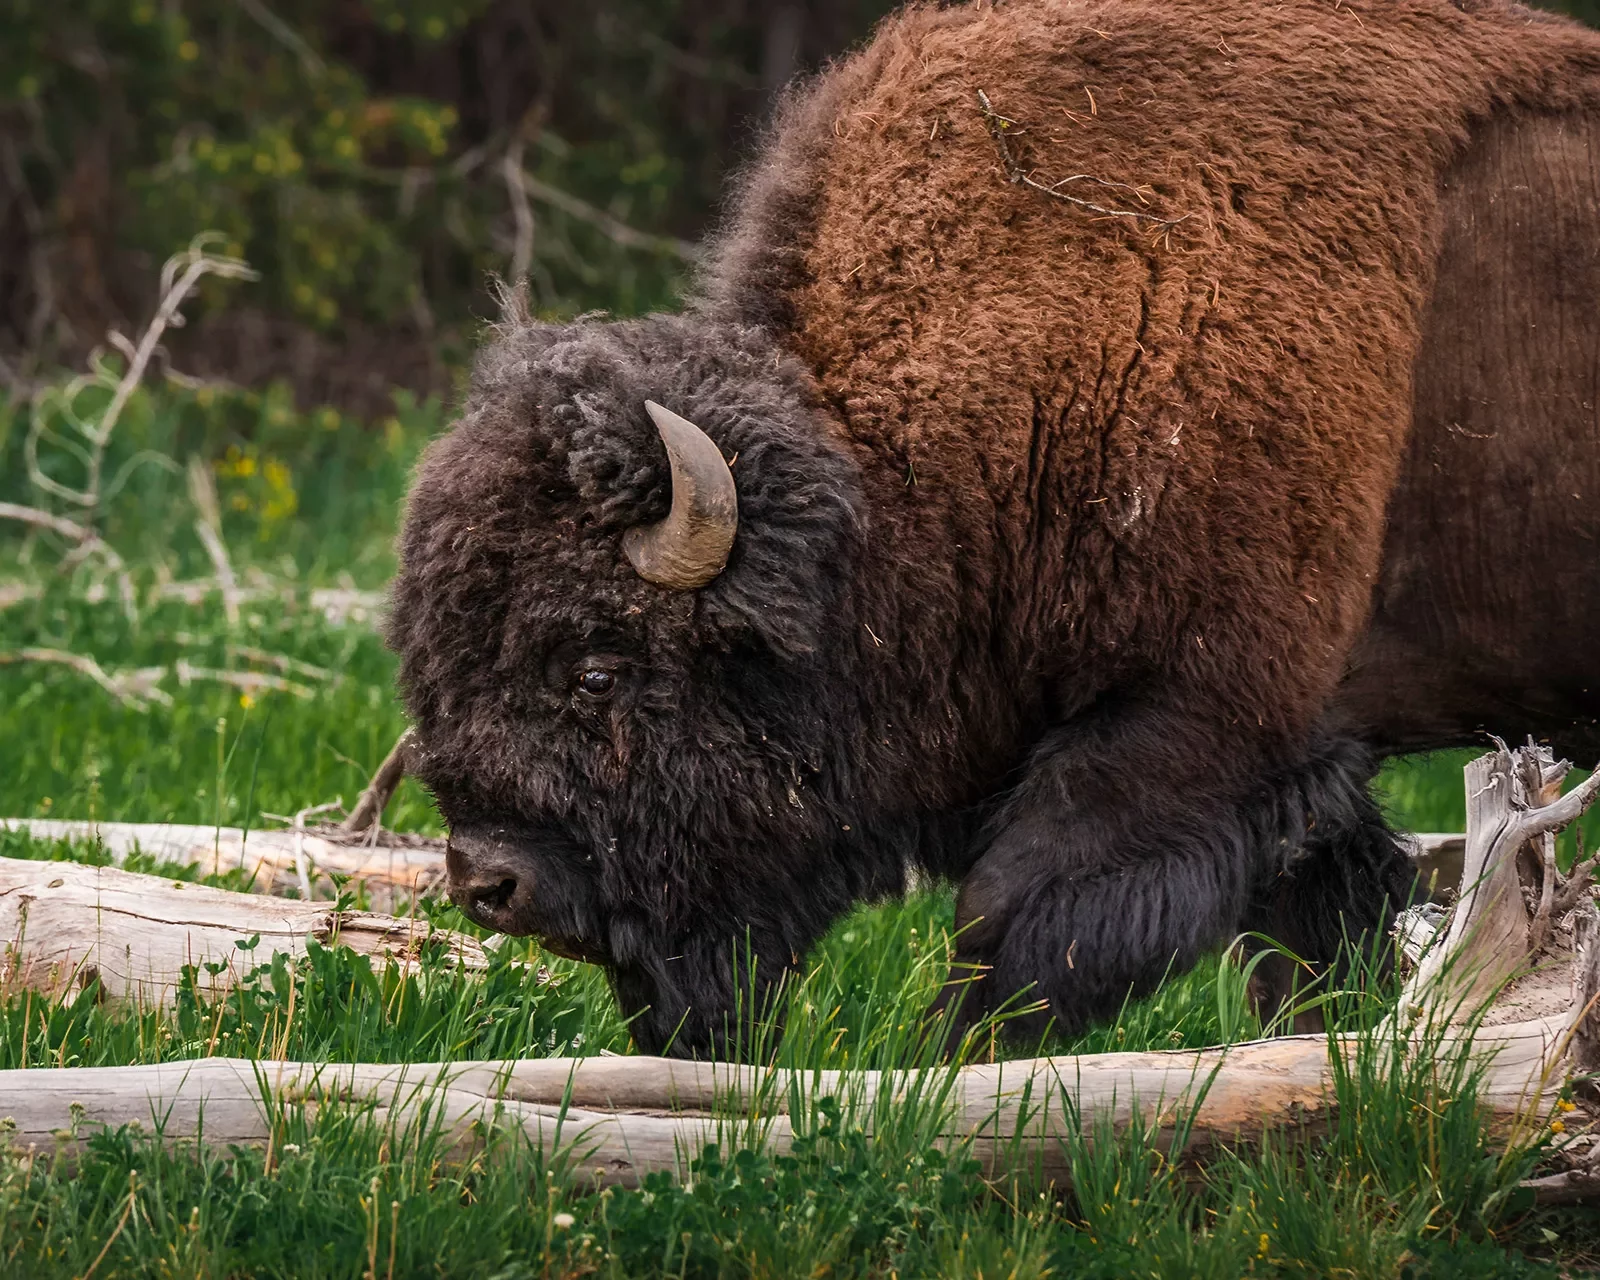 Bison bending down to snack on grass